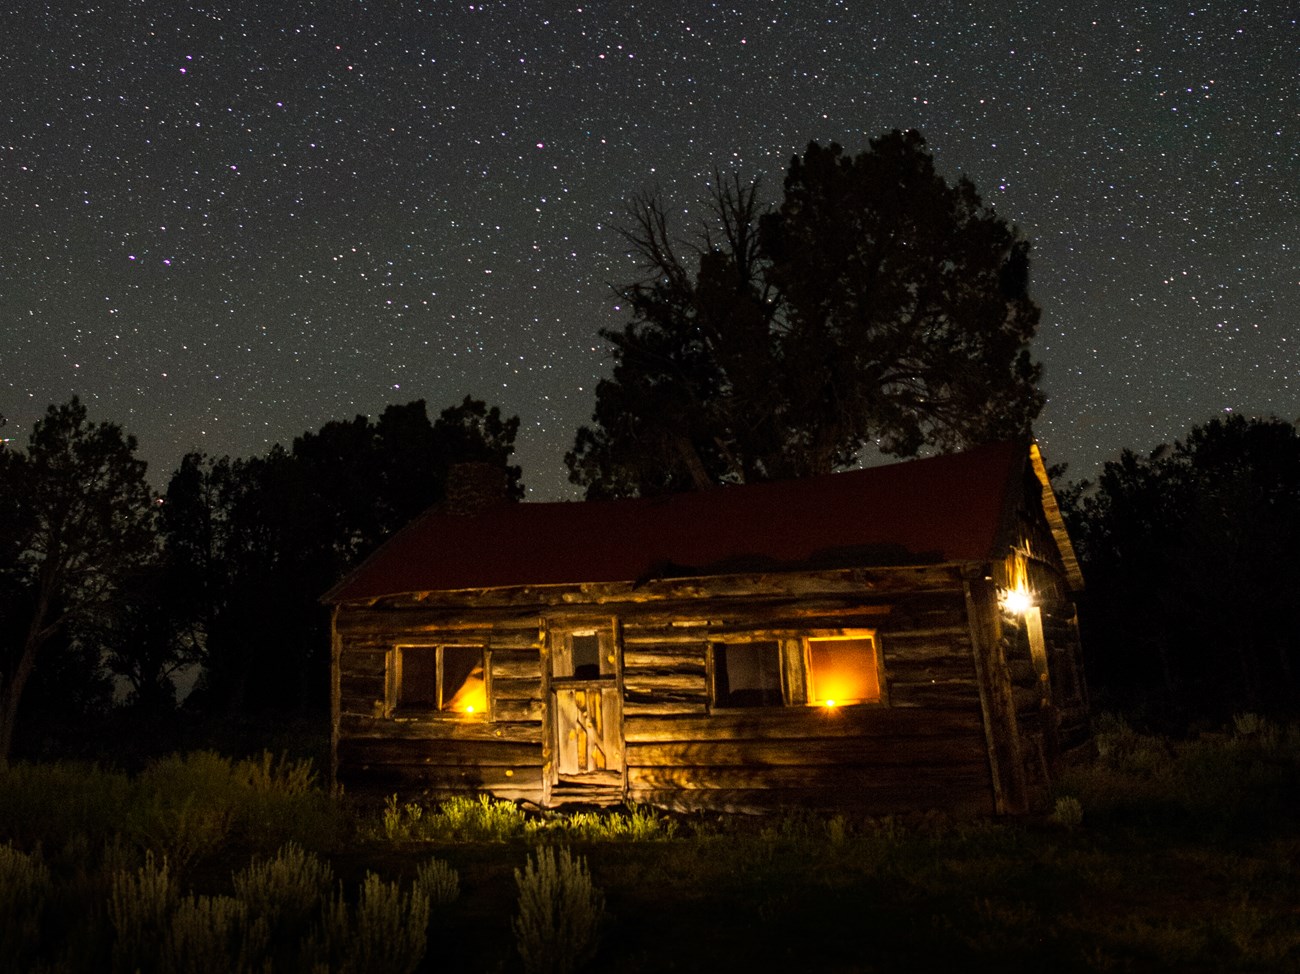 Starry night view of the Waring Ranch House, Parashant National Monument, AZ.